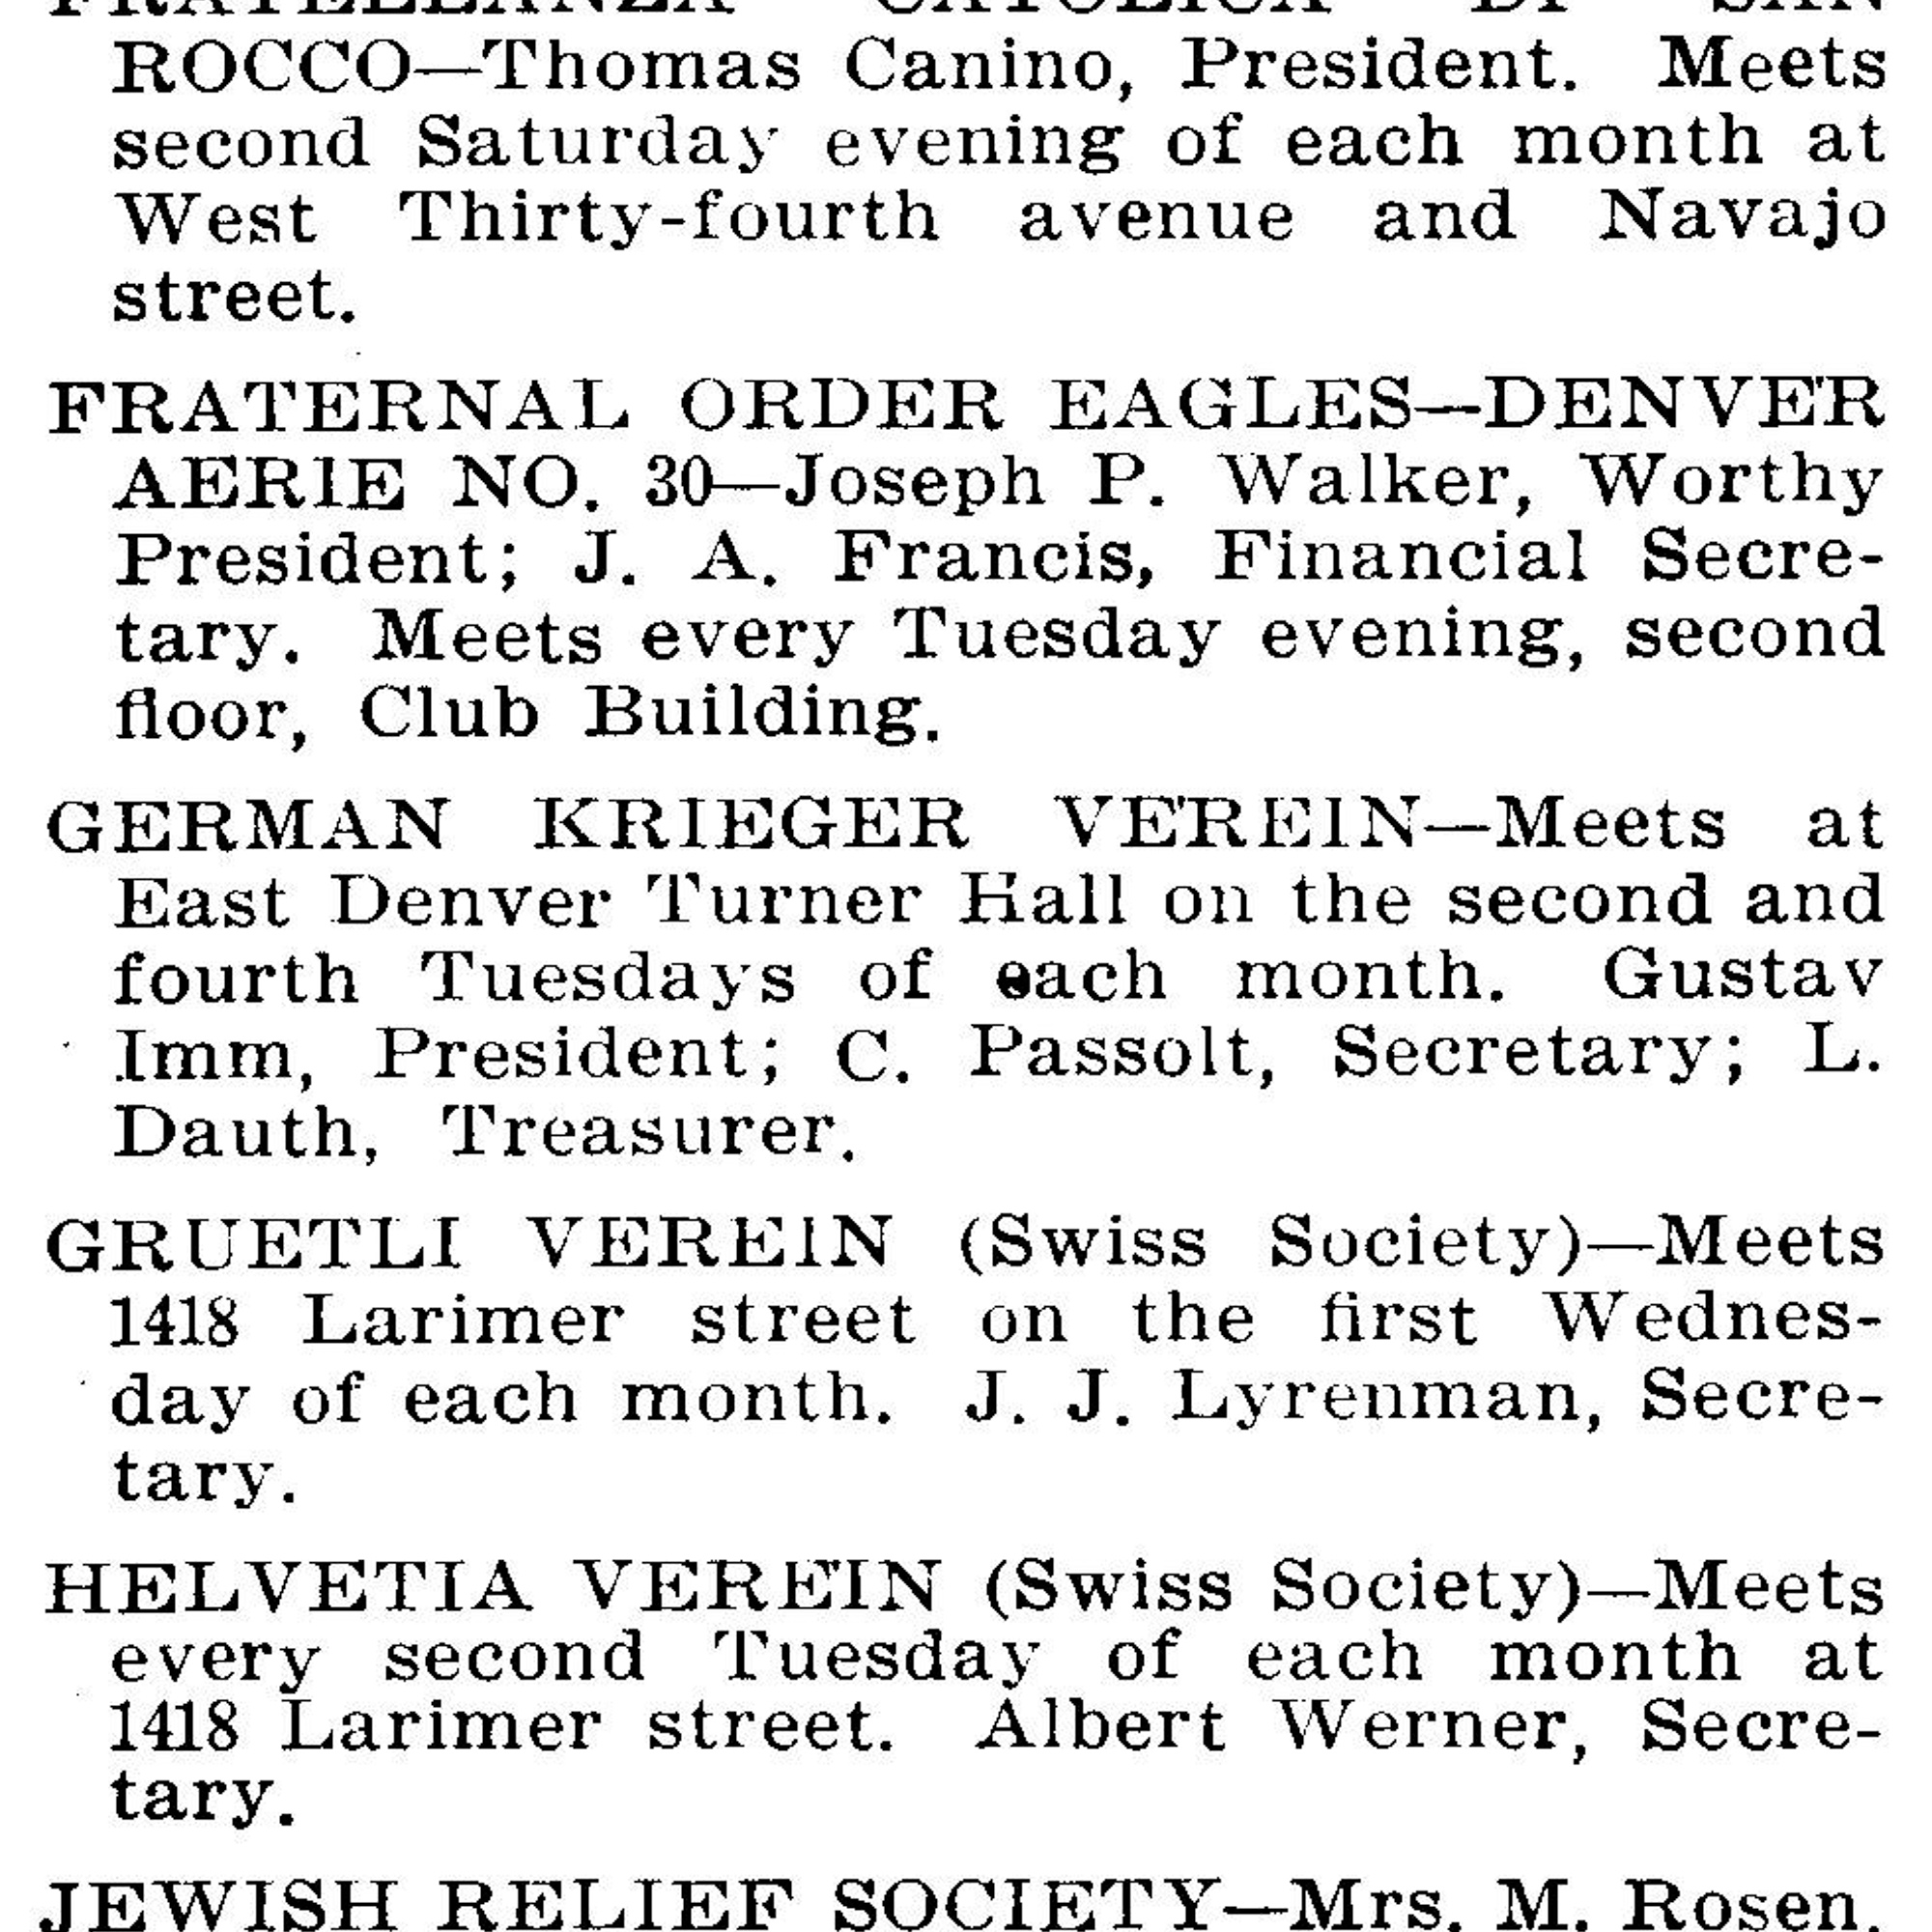 Dauth Family Archive - 1911 - Denver Directory - Entry For German Krieger Verein